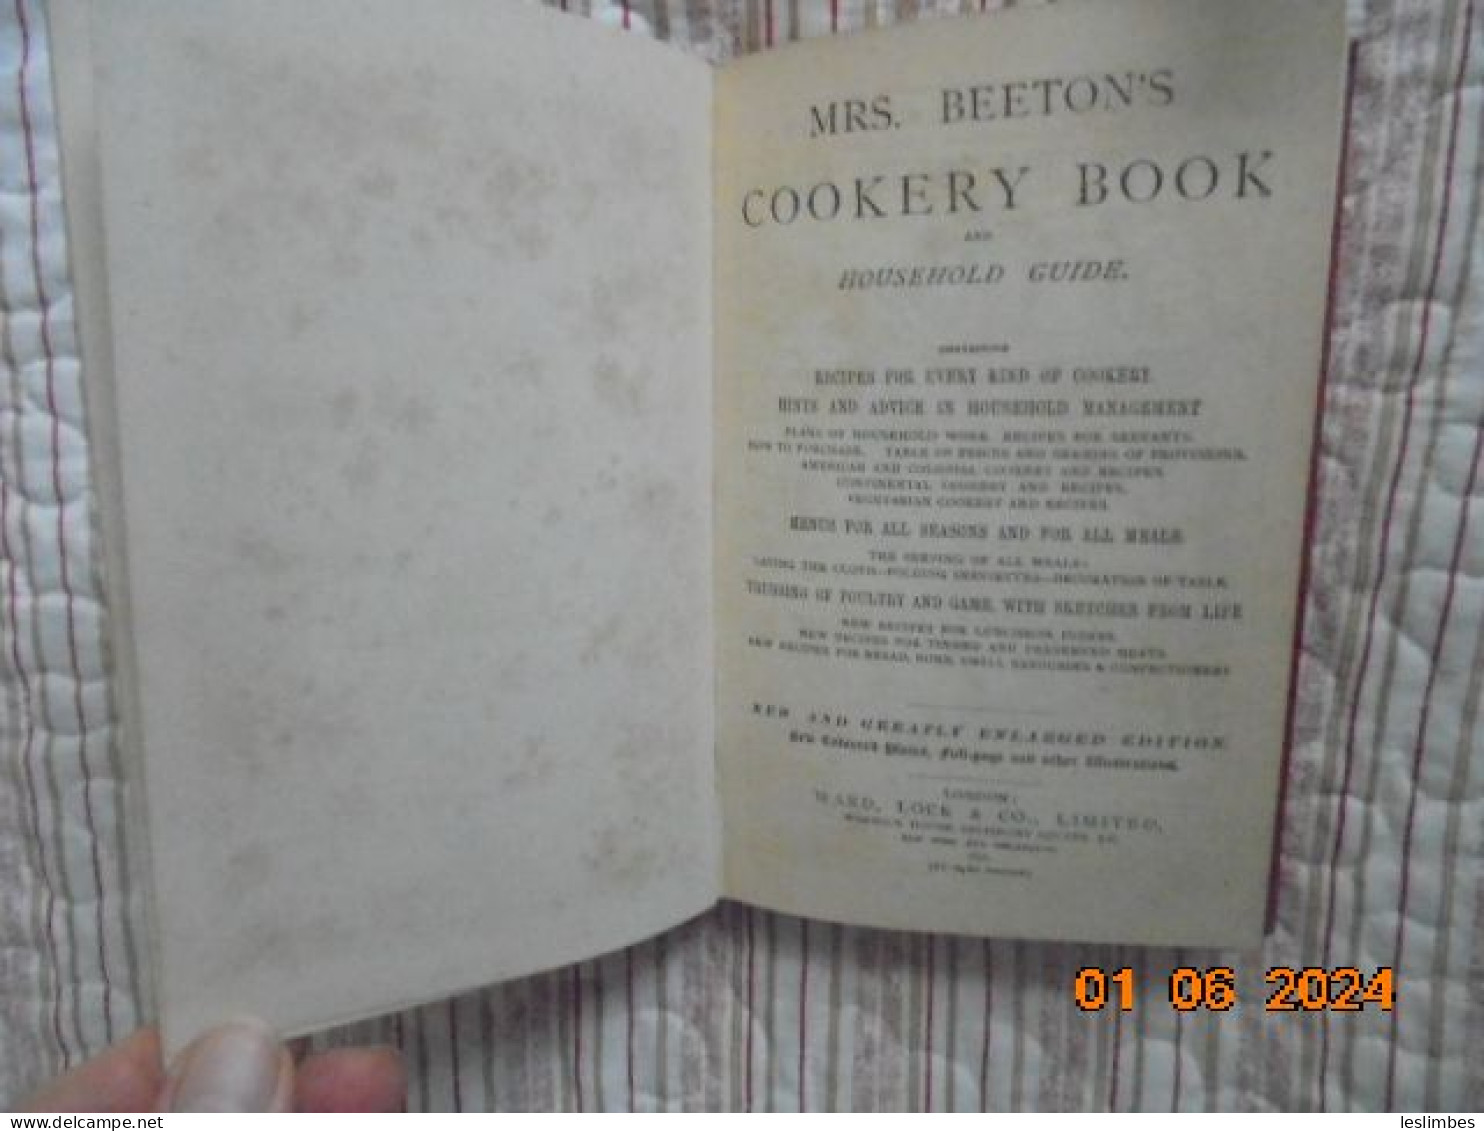 Mrs Beeton's Cookery Book And Household Guide. 1898 New & Enlarged Edition. 516 Columns, 1000 Receipts And Instructions - Cocina General